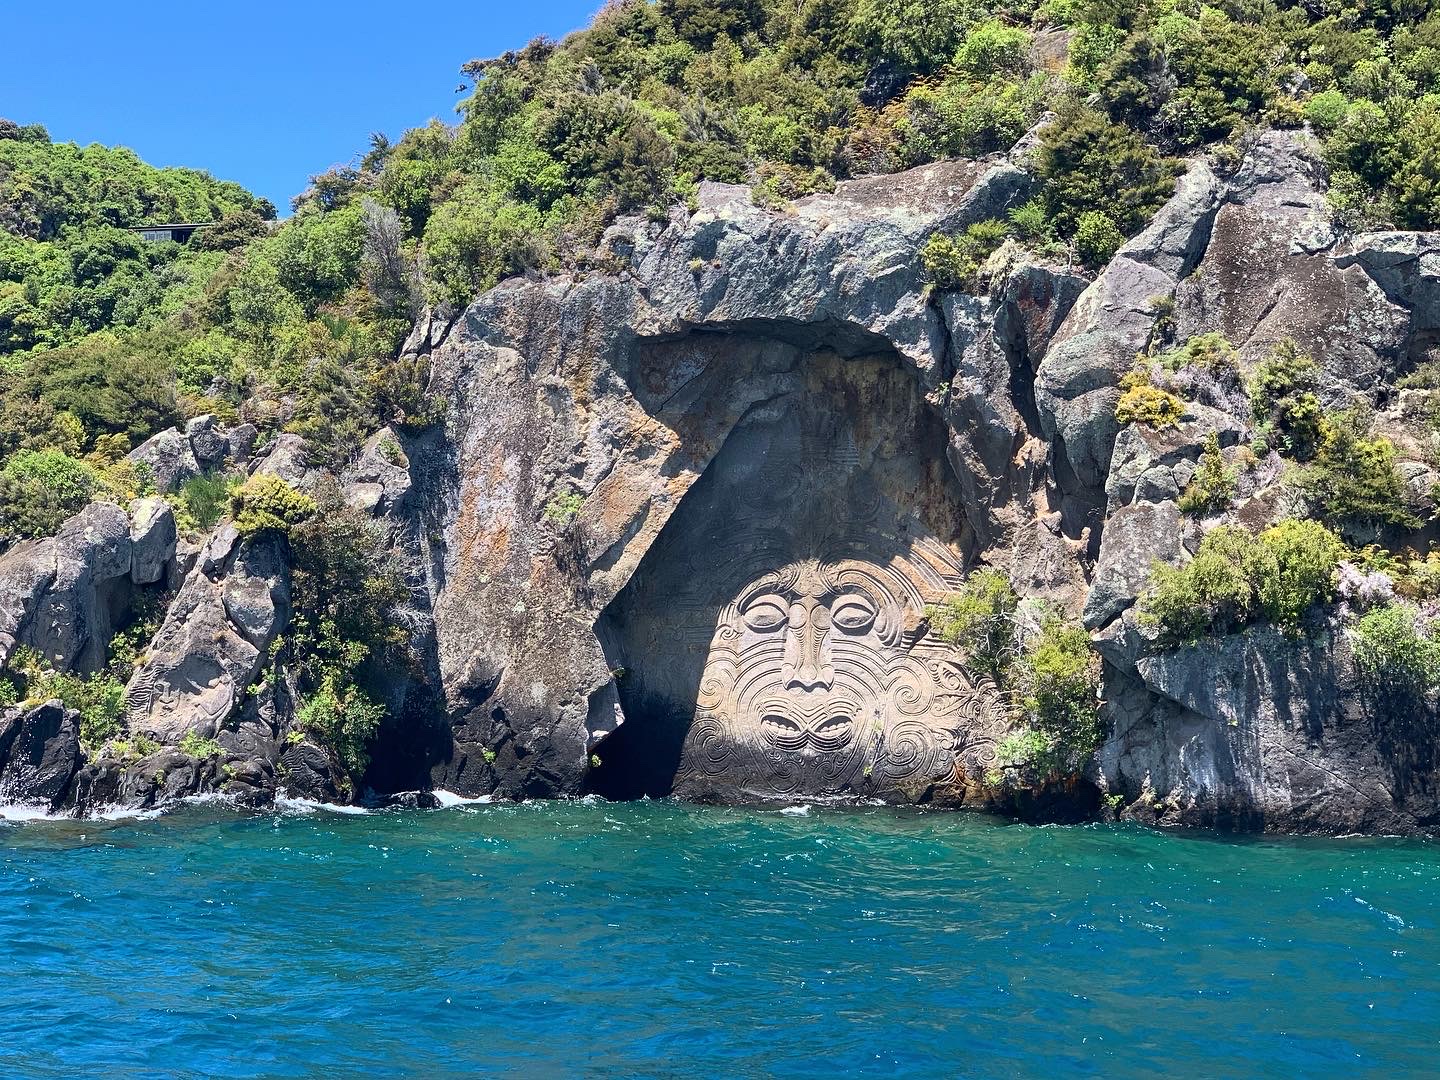 A rock face along the water's edge with a large carving of a face with two mouths.